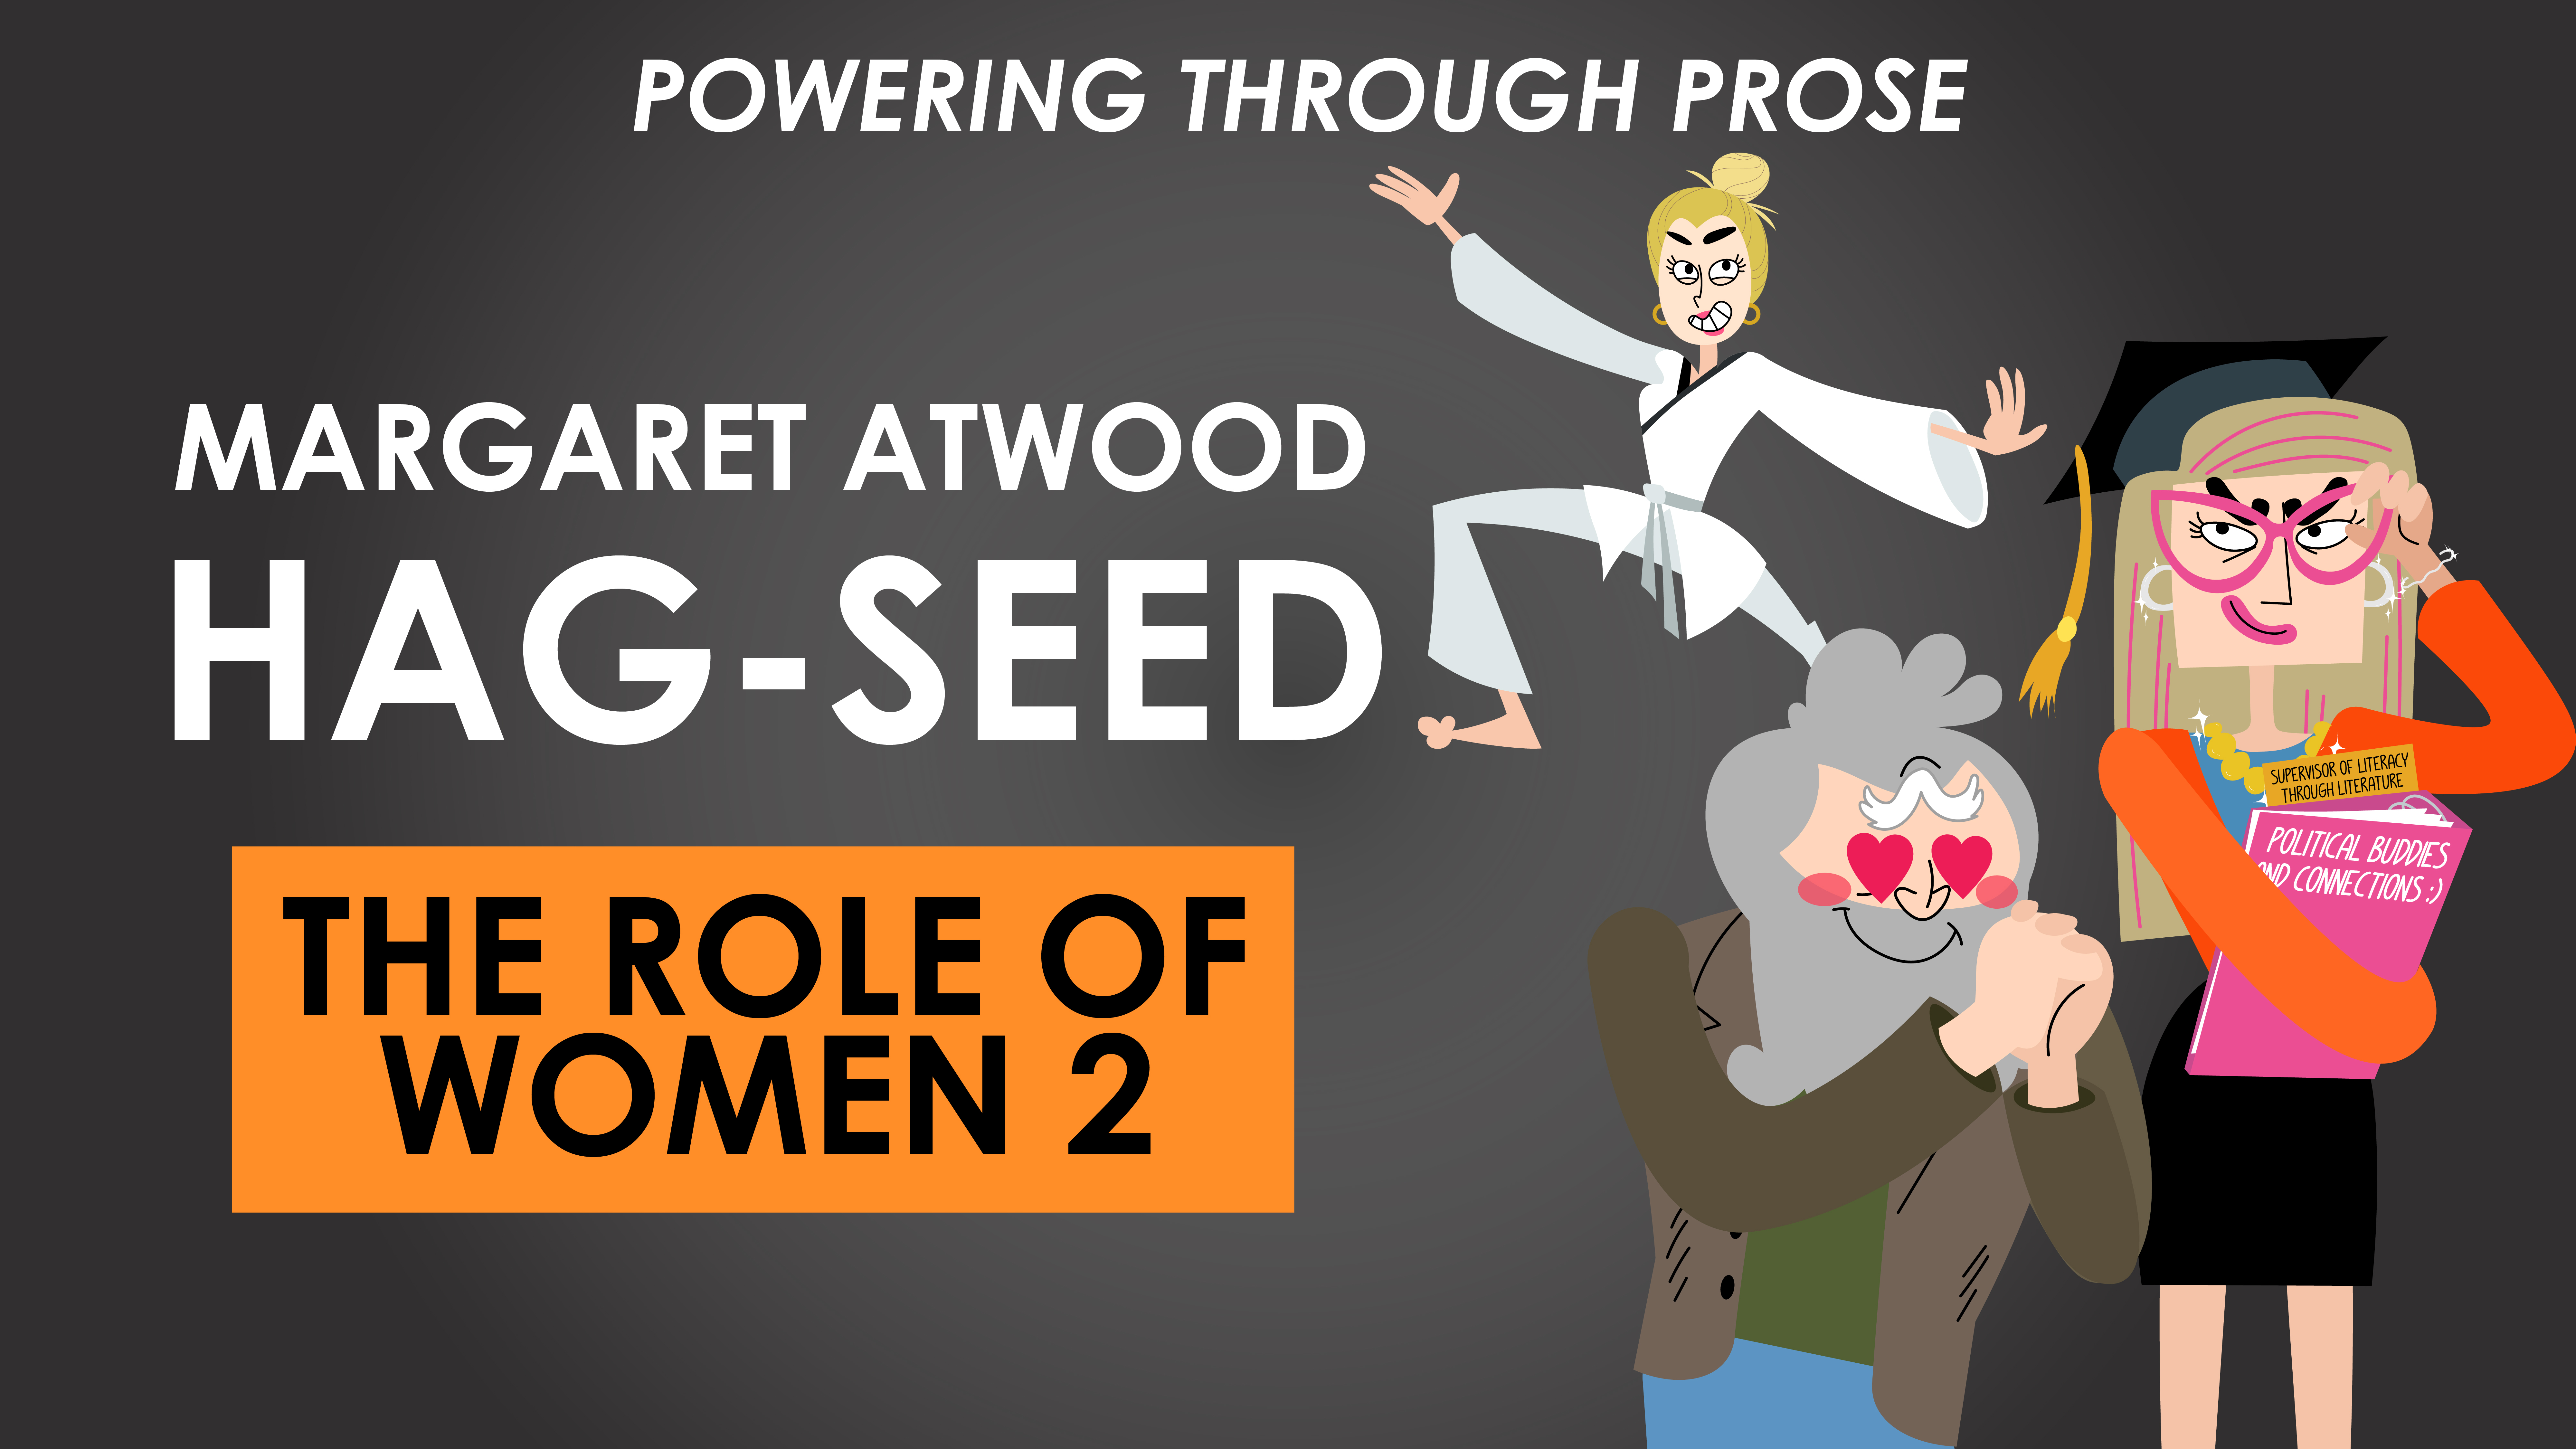 Hag-Seed - Margaret Atwood - Role of Women 2 - Powering through Prose Series